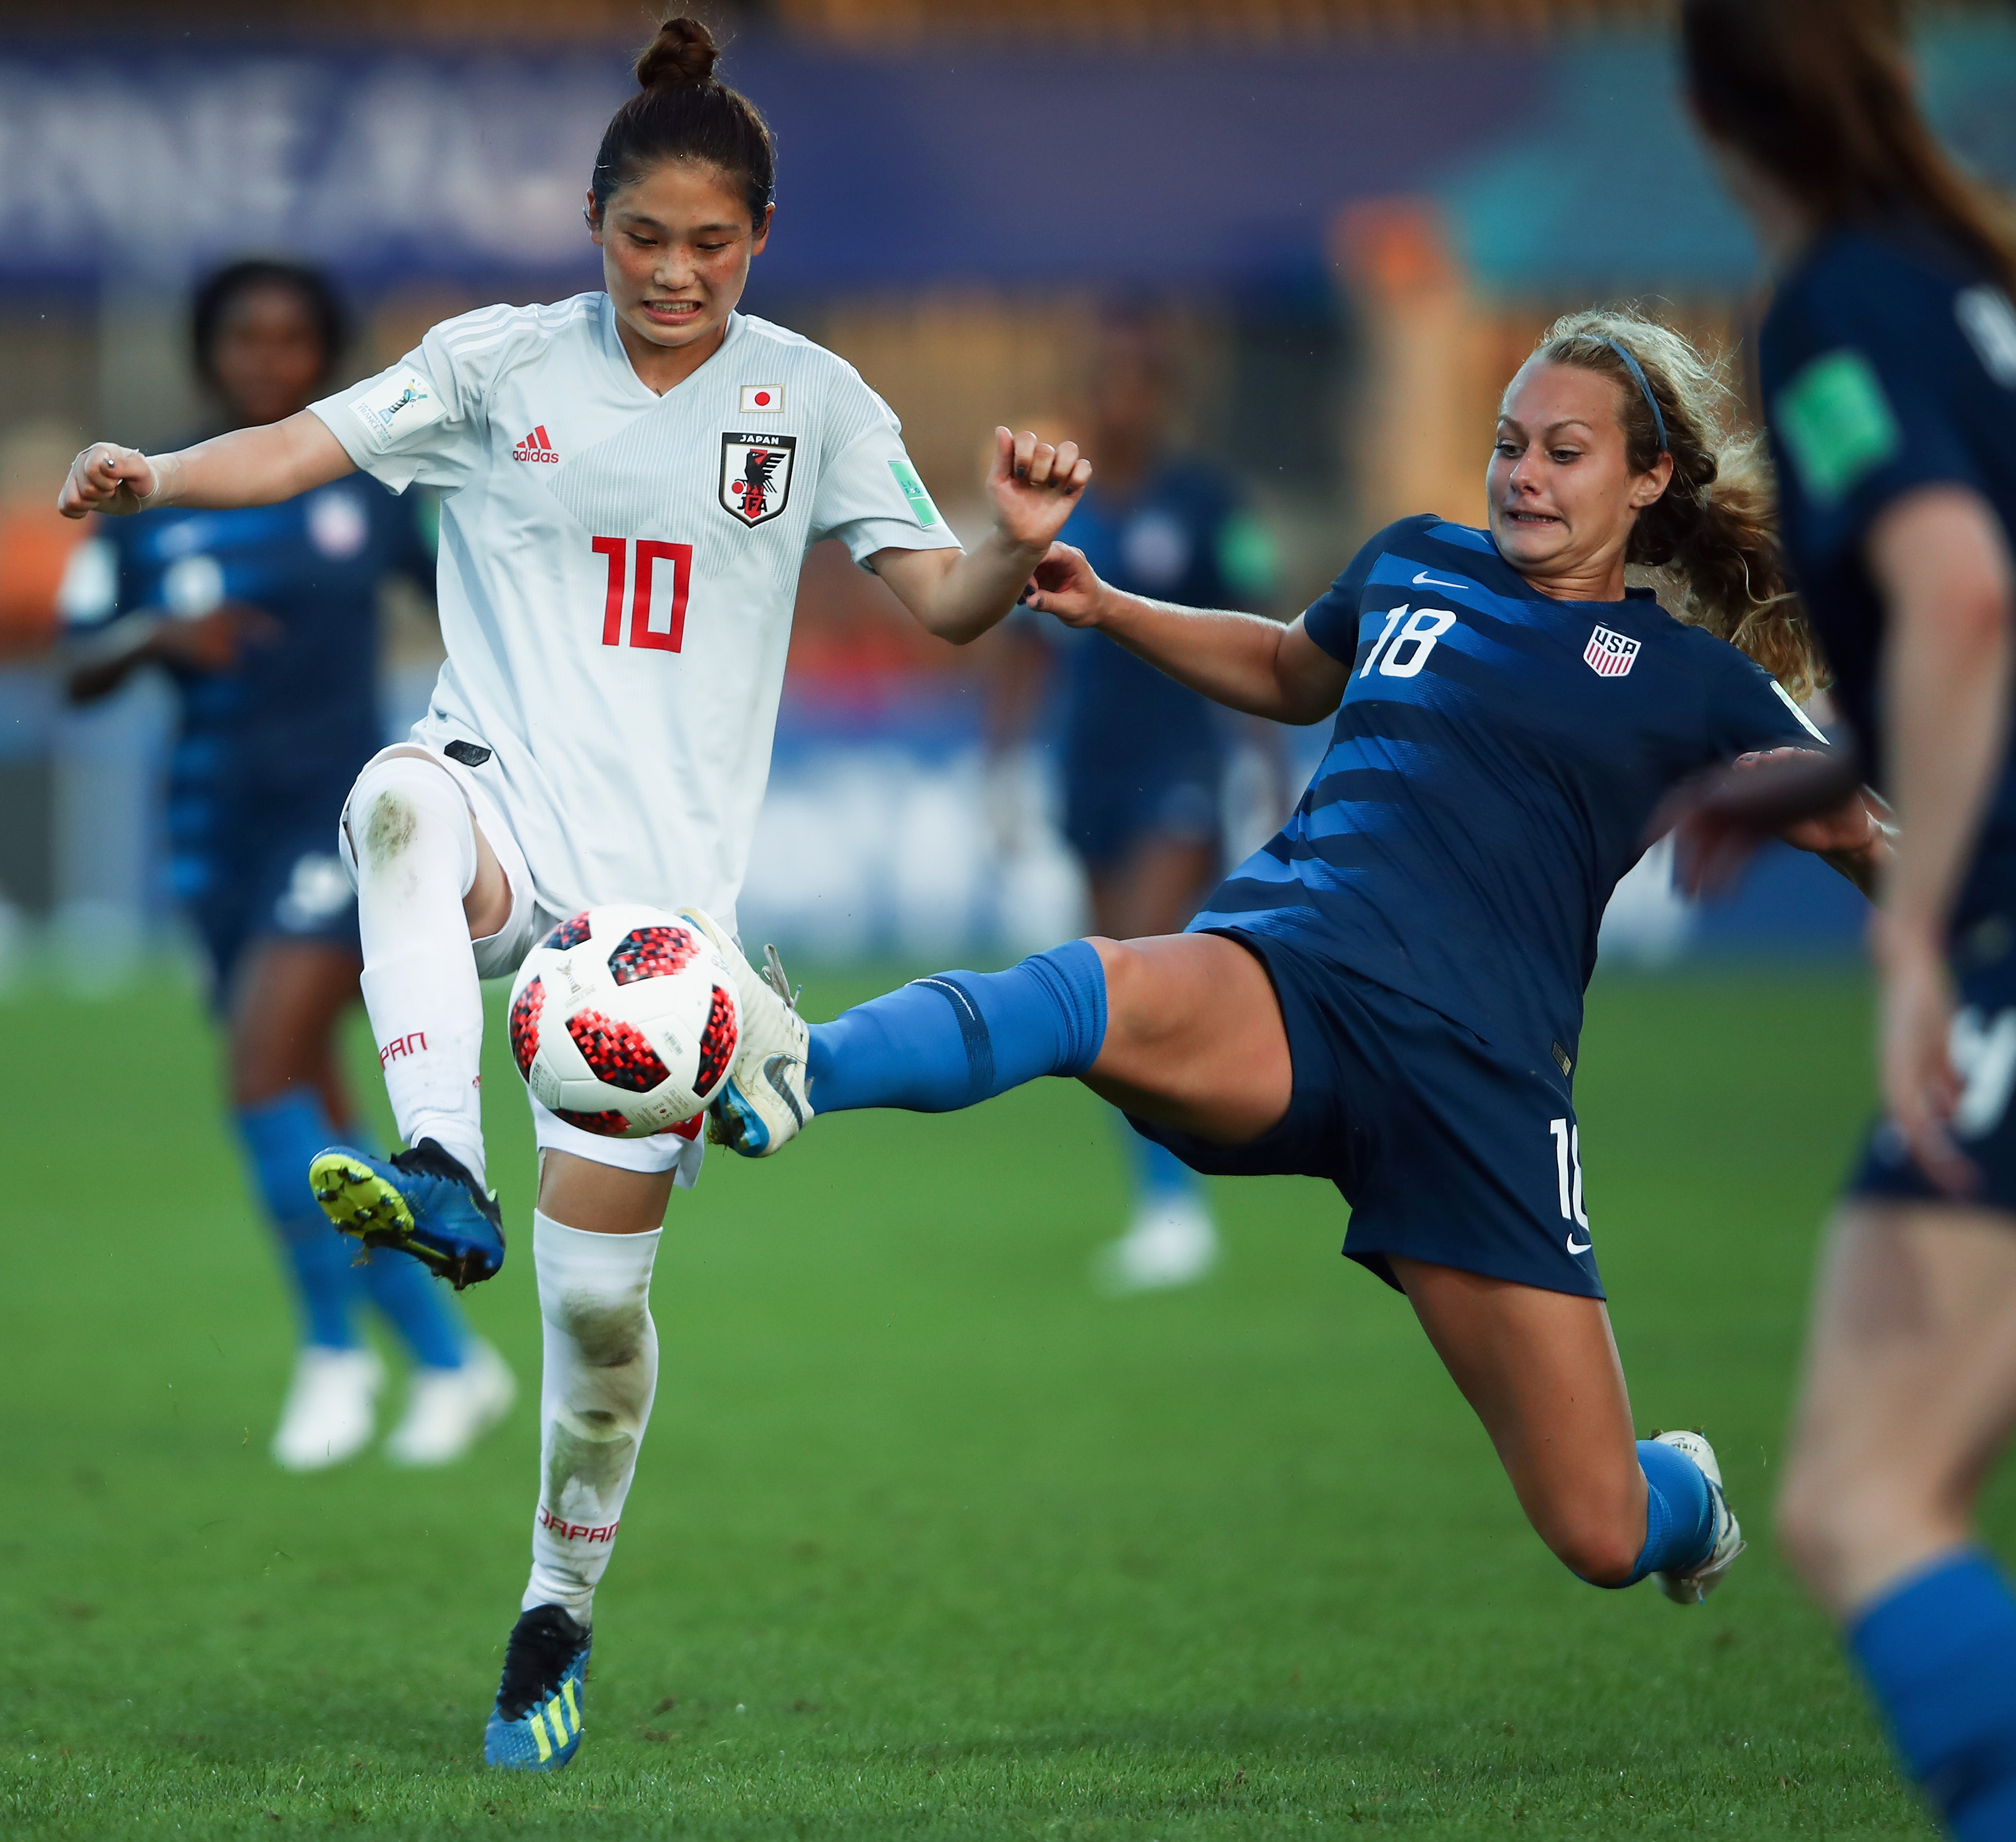 : Fuka Nagano (L) of Japan is challenged by Jaelin Howell of the United States during the FIFA U-20 Women's World Cup France 2018 group C match between USA and Japan at Stade Guy-Piriou on August 6, 2018 in Concarneau, France. 